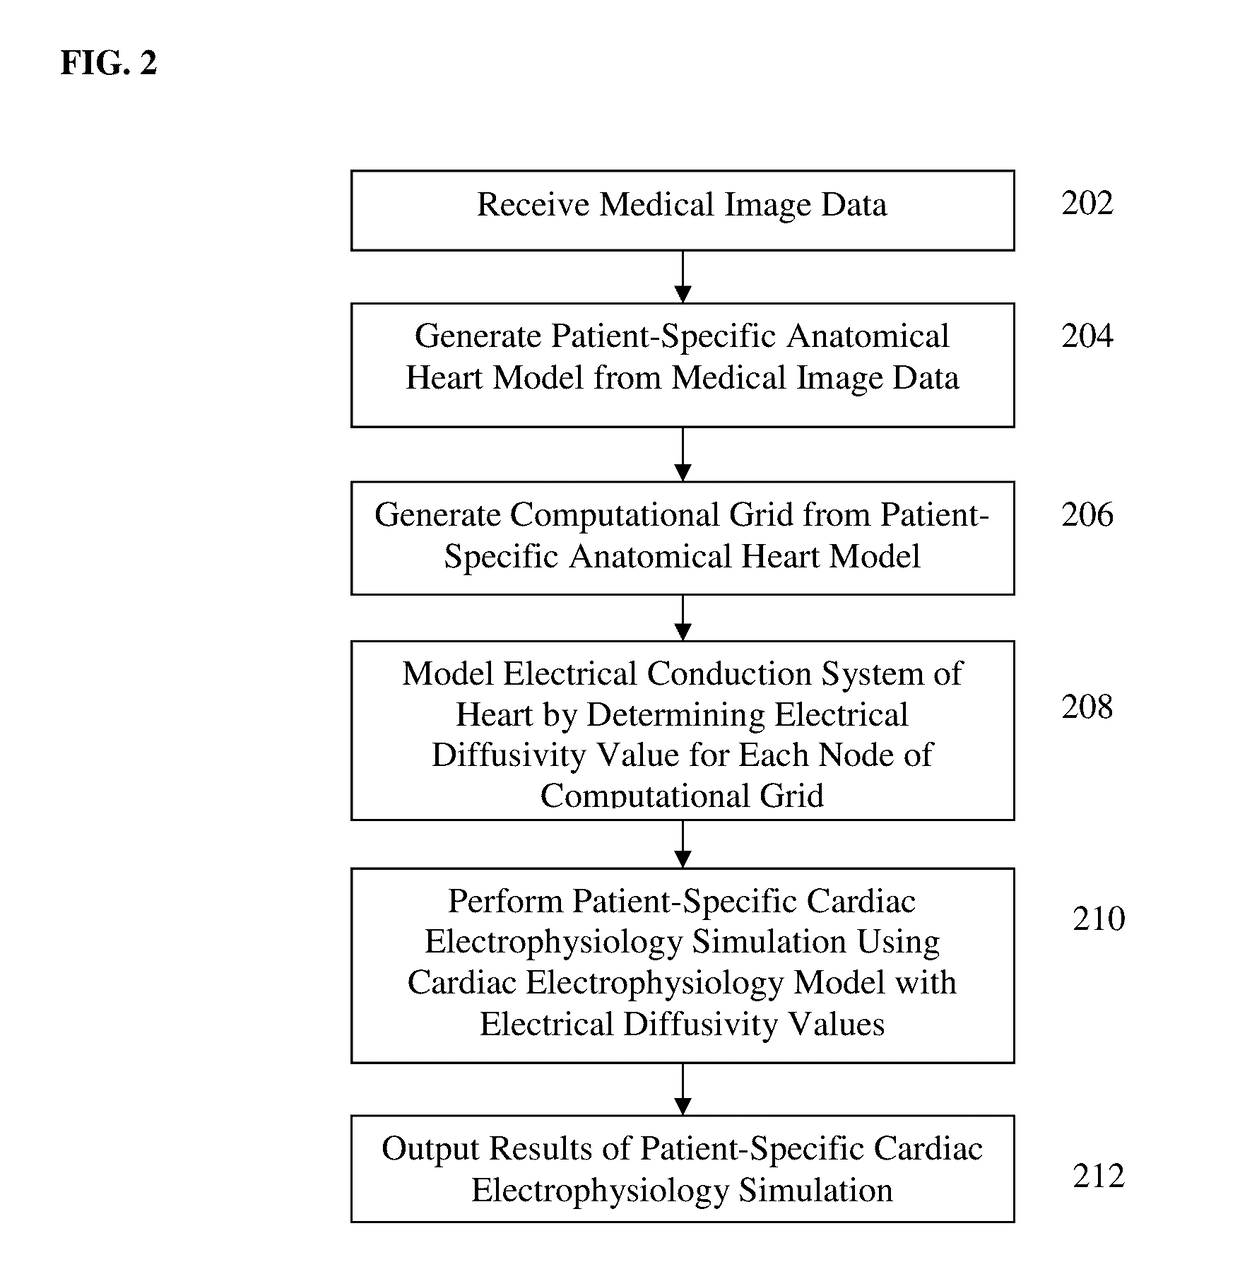 System and method for real-time simulation of patient-specific cardiac electrophysiology including the effect of the electrical conduction system of the heart